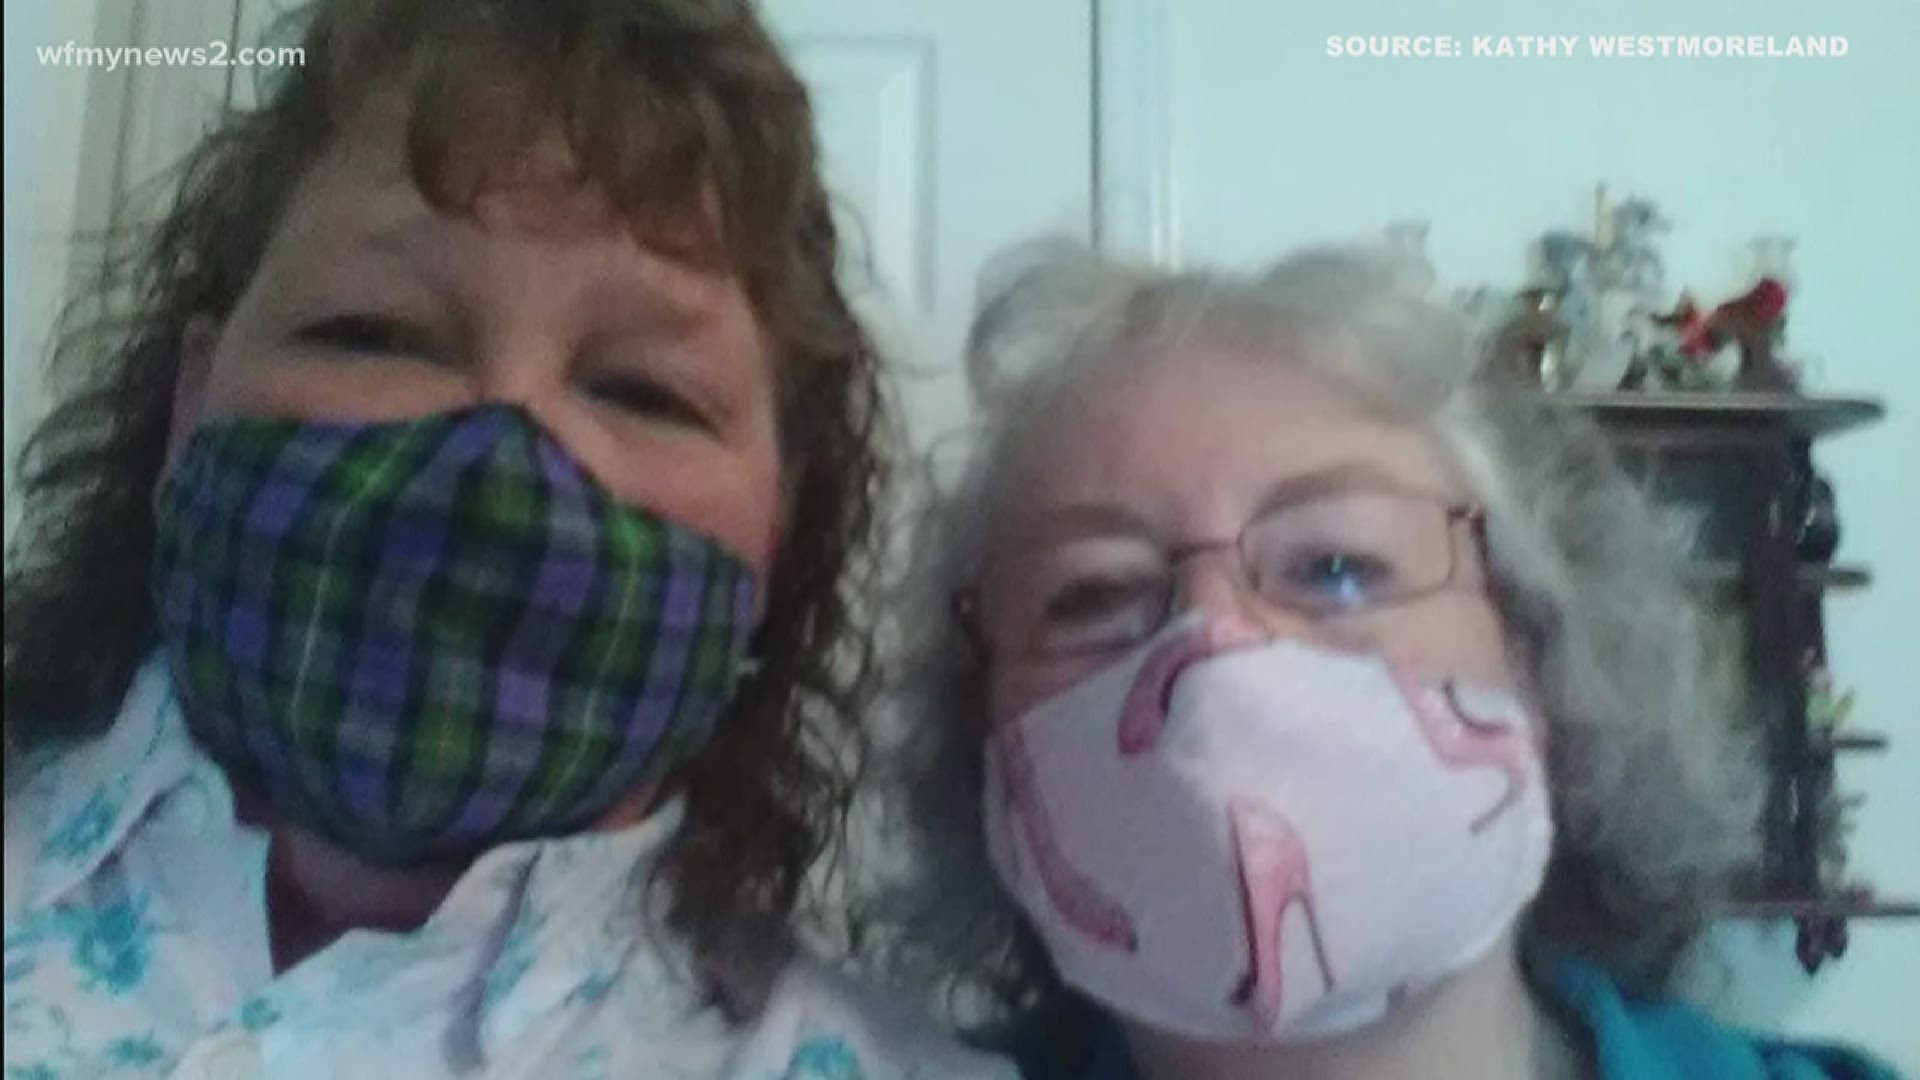 Kathy Westmoreland has always worn masks for health issues. Now, she makes them for others.